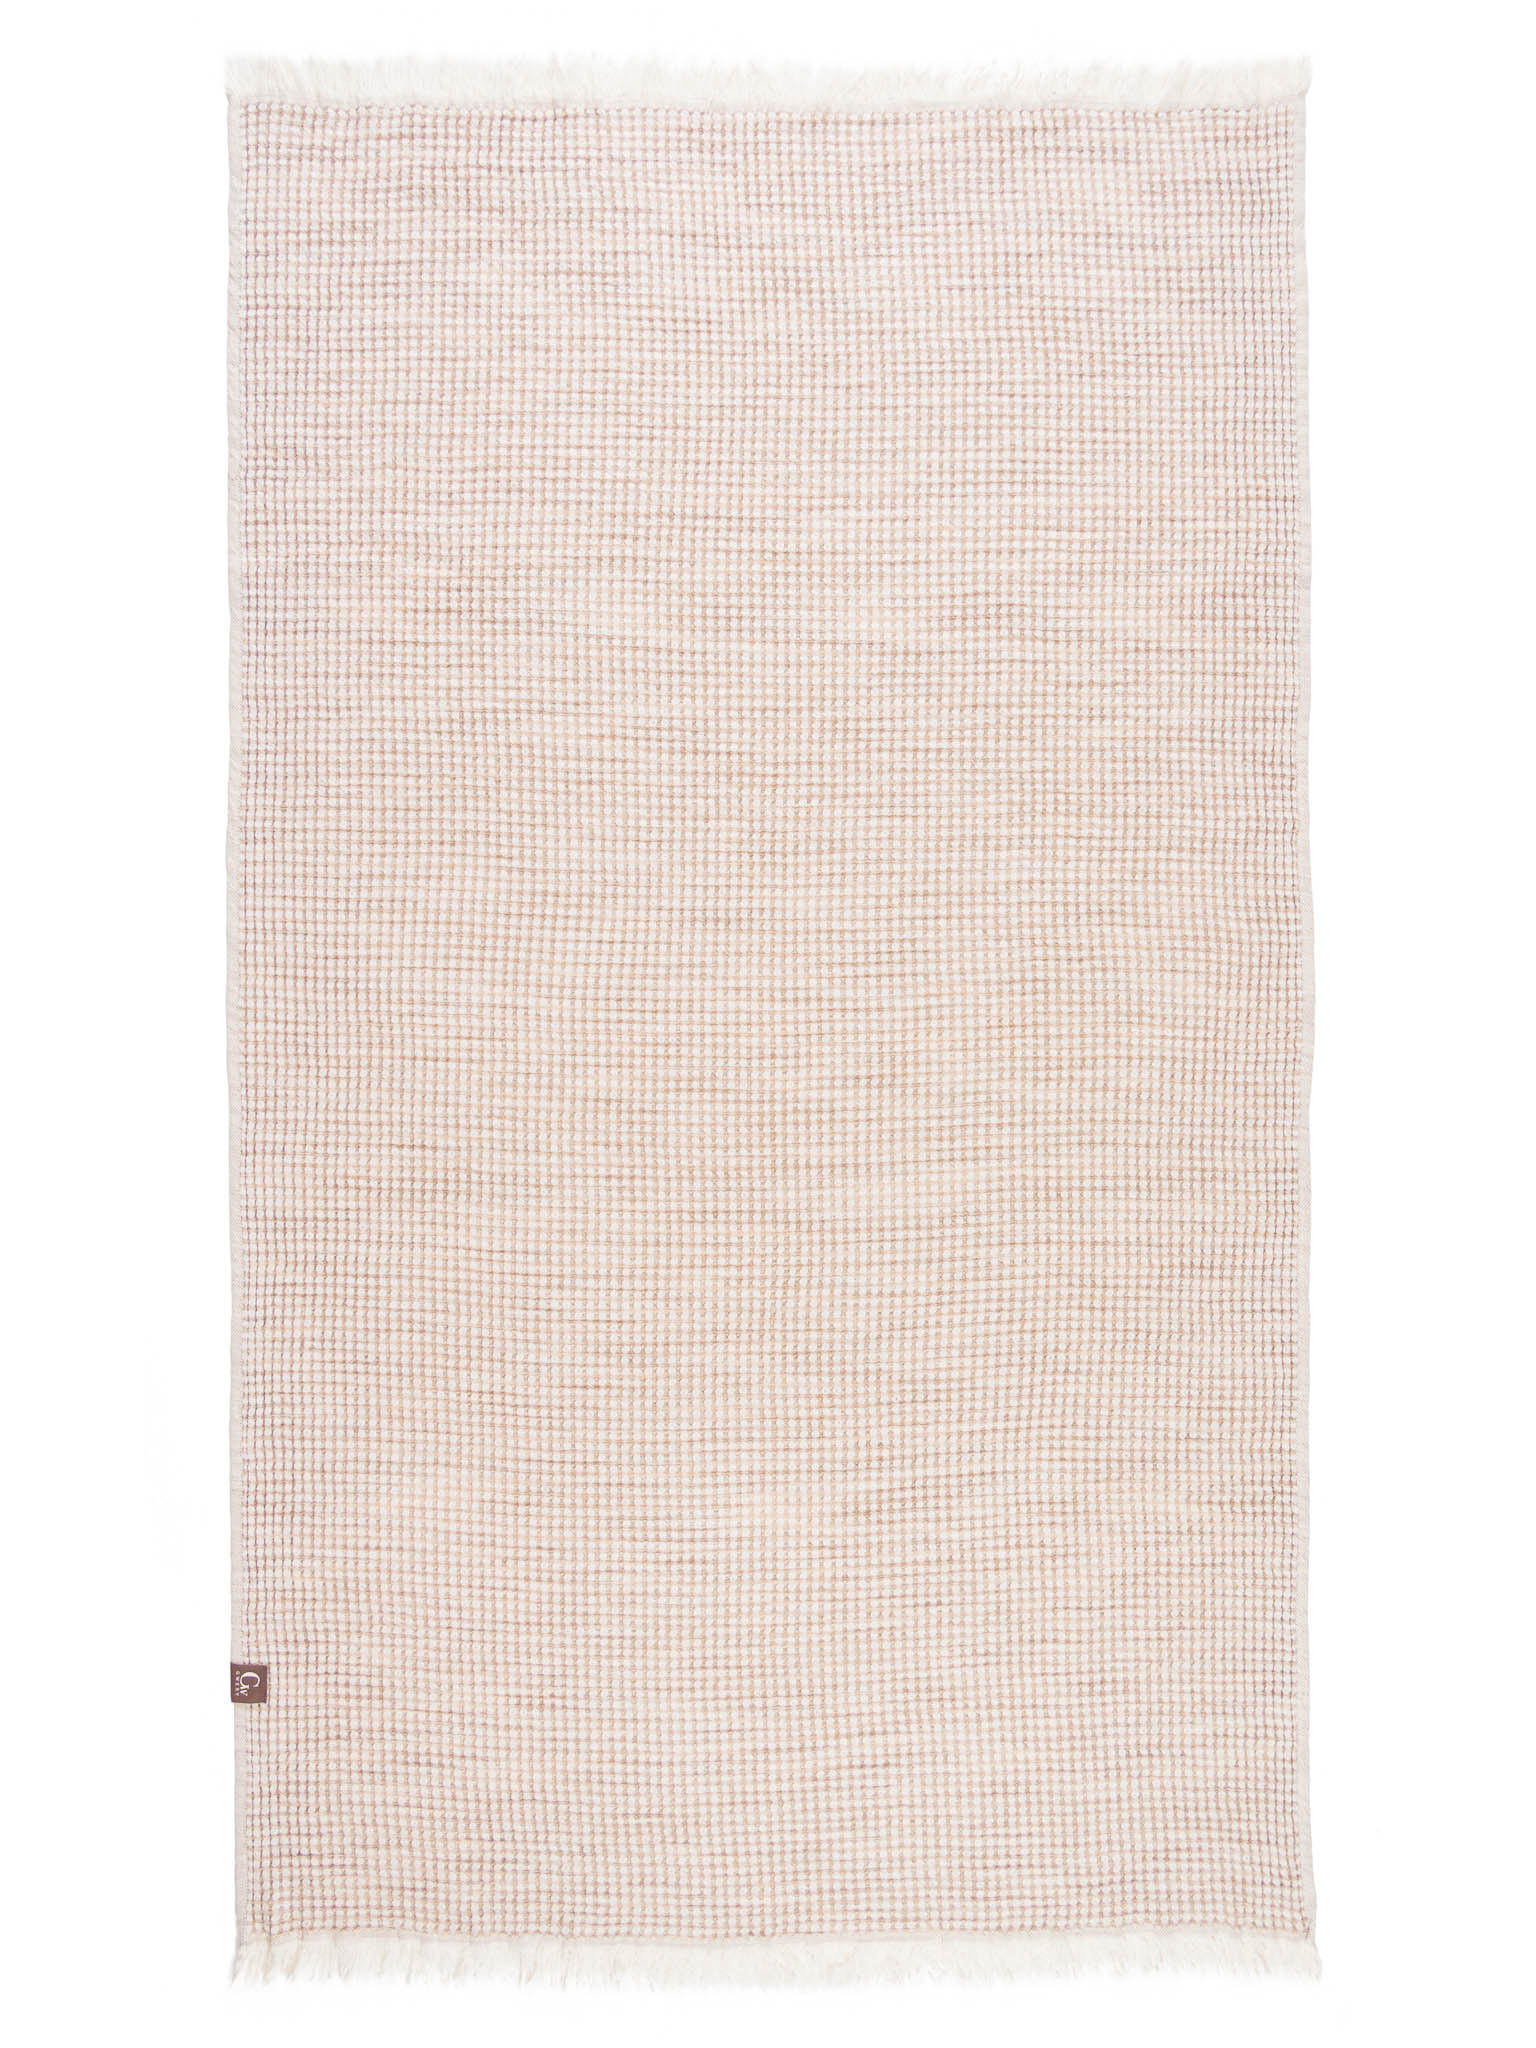 Brown patterned double sided honeycomb beach towel open up